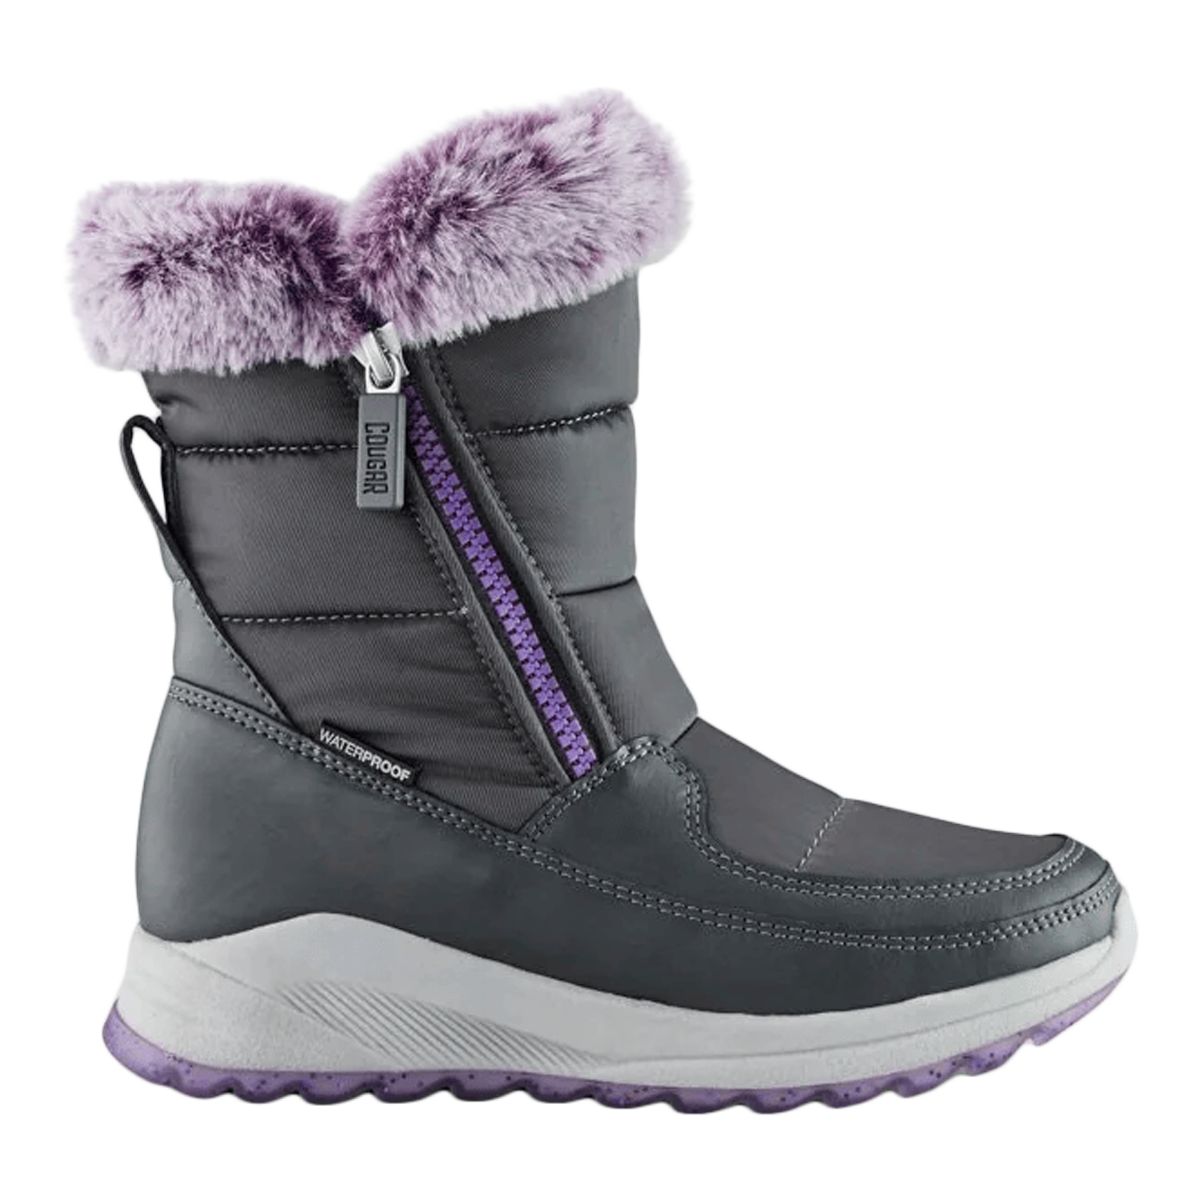 Image of Cougar Kids' Starla Waterproof Pull-On Insulated Winter Boots